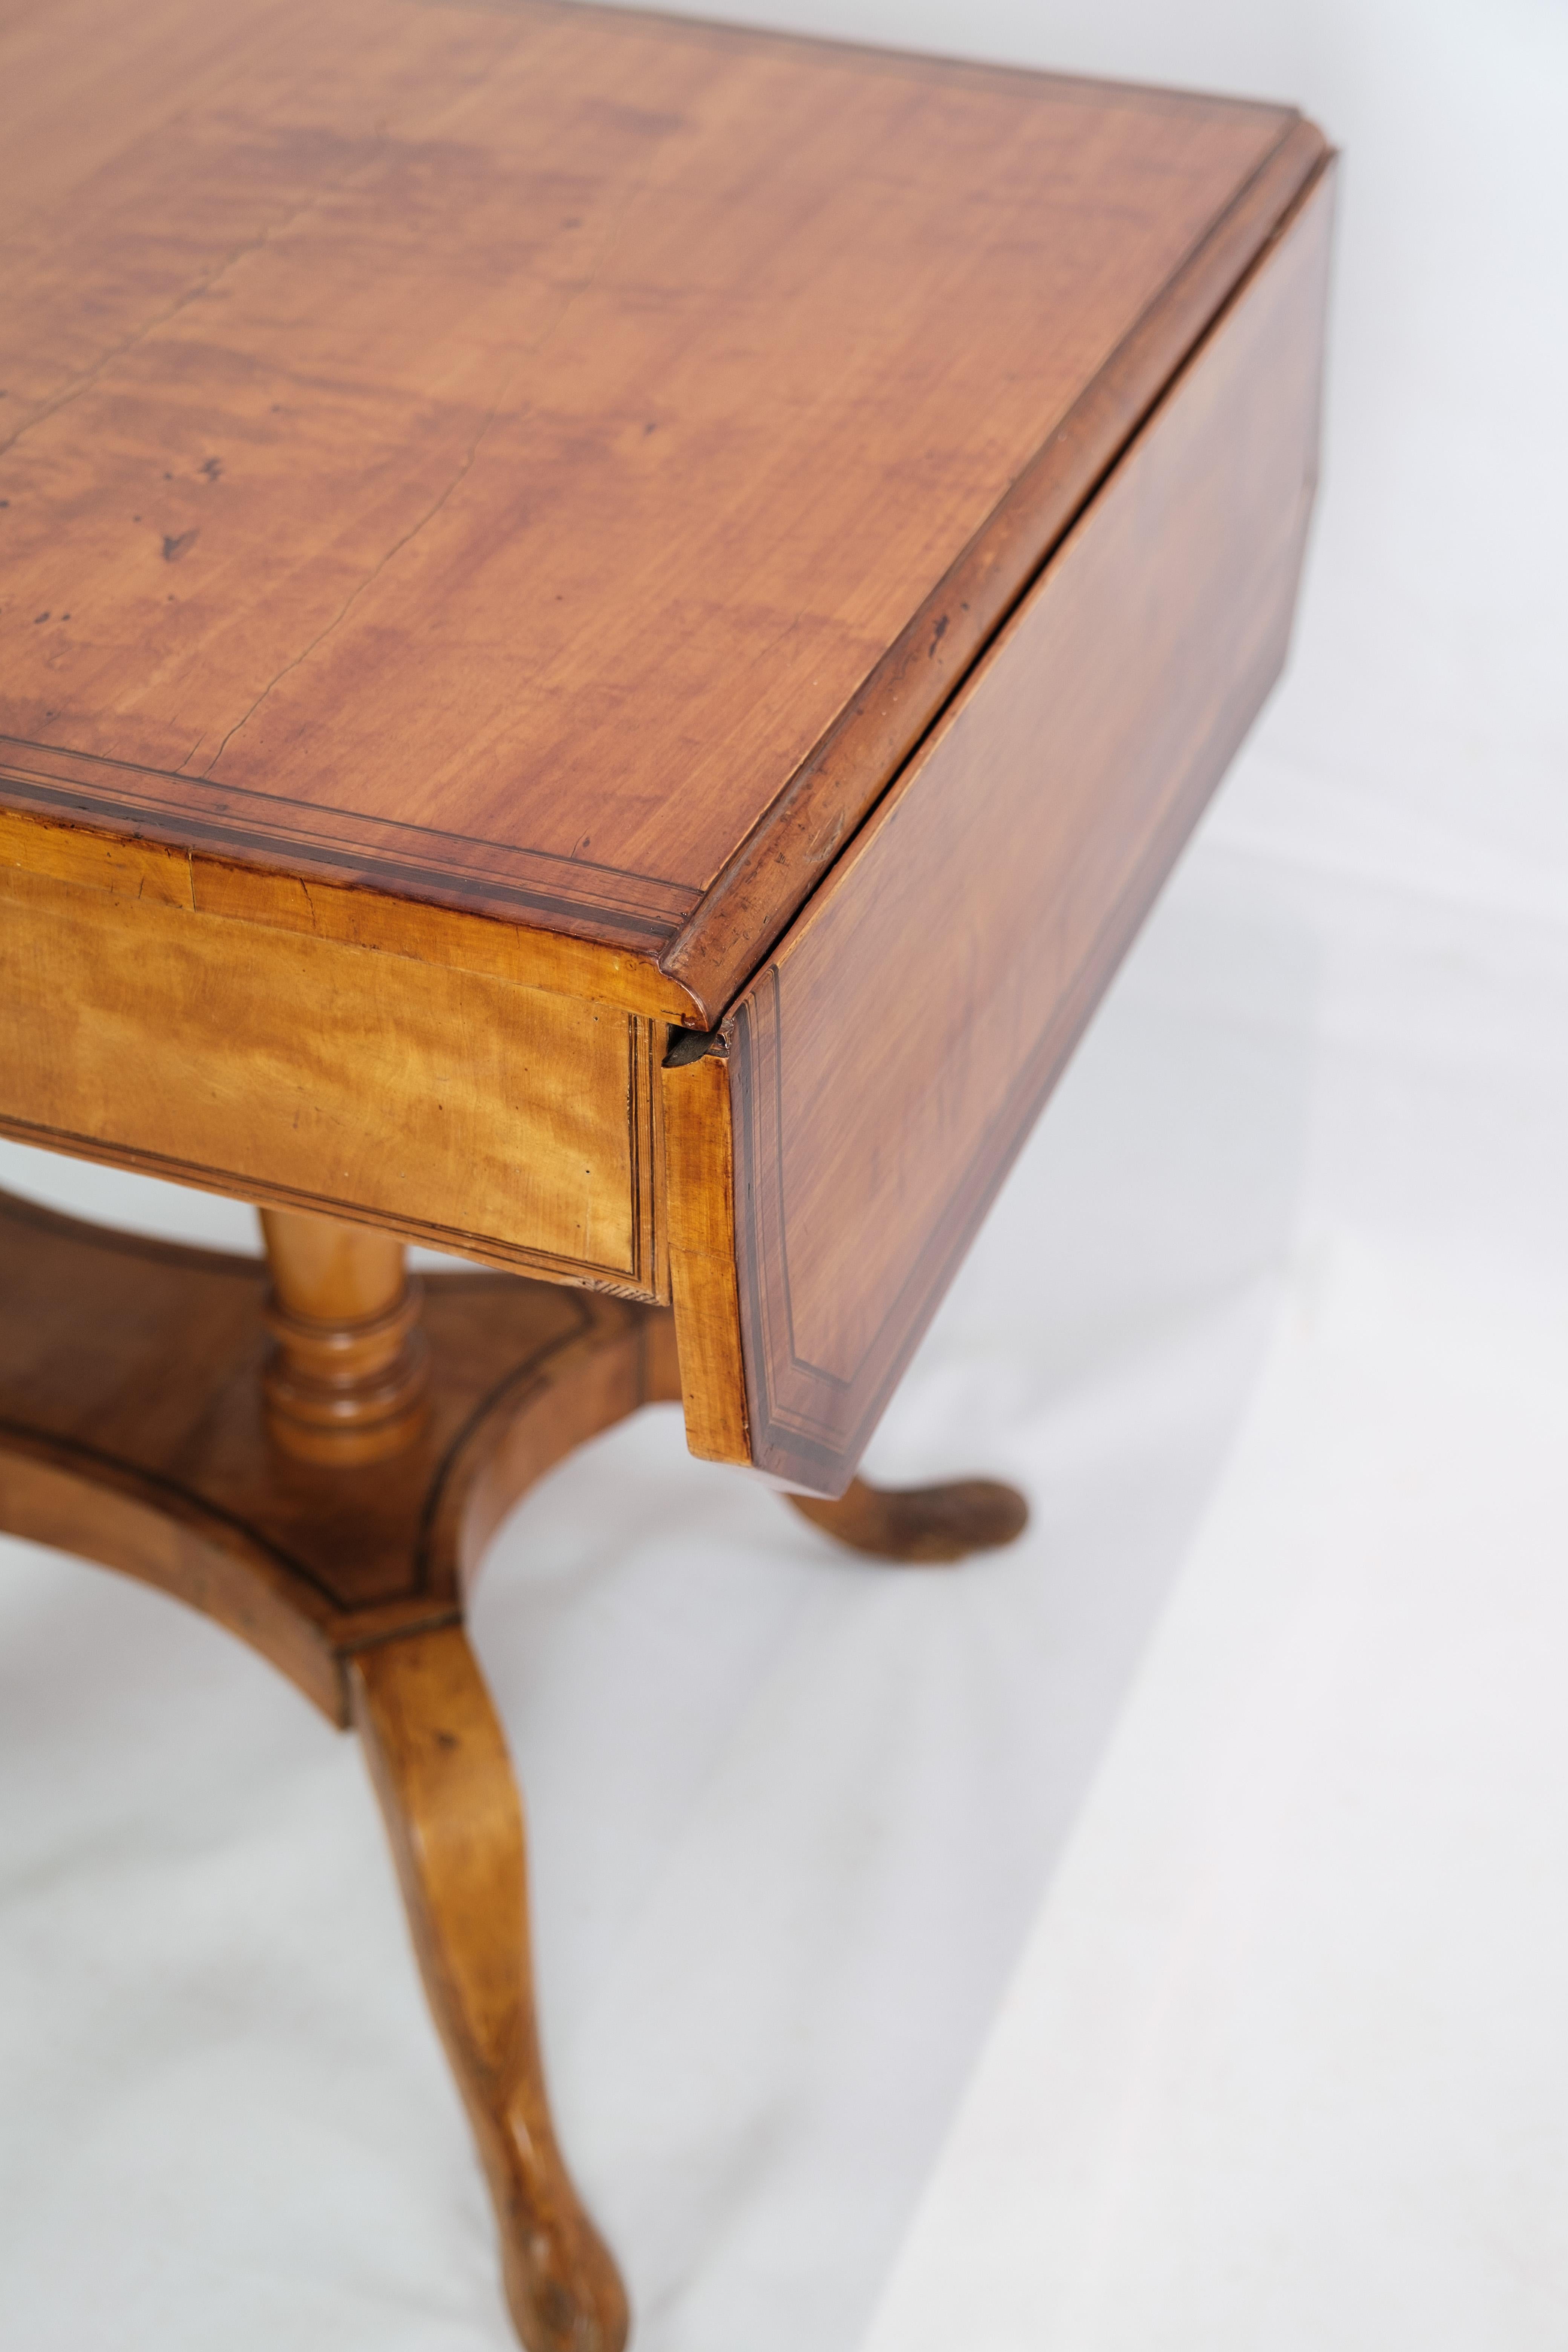 Antique Empire Table with Flaps and Marquetry in Birch Wood from 1840s In Good Condition For Sale In Lejre, DK